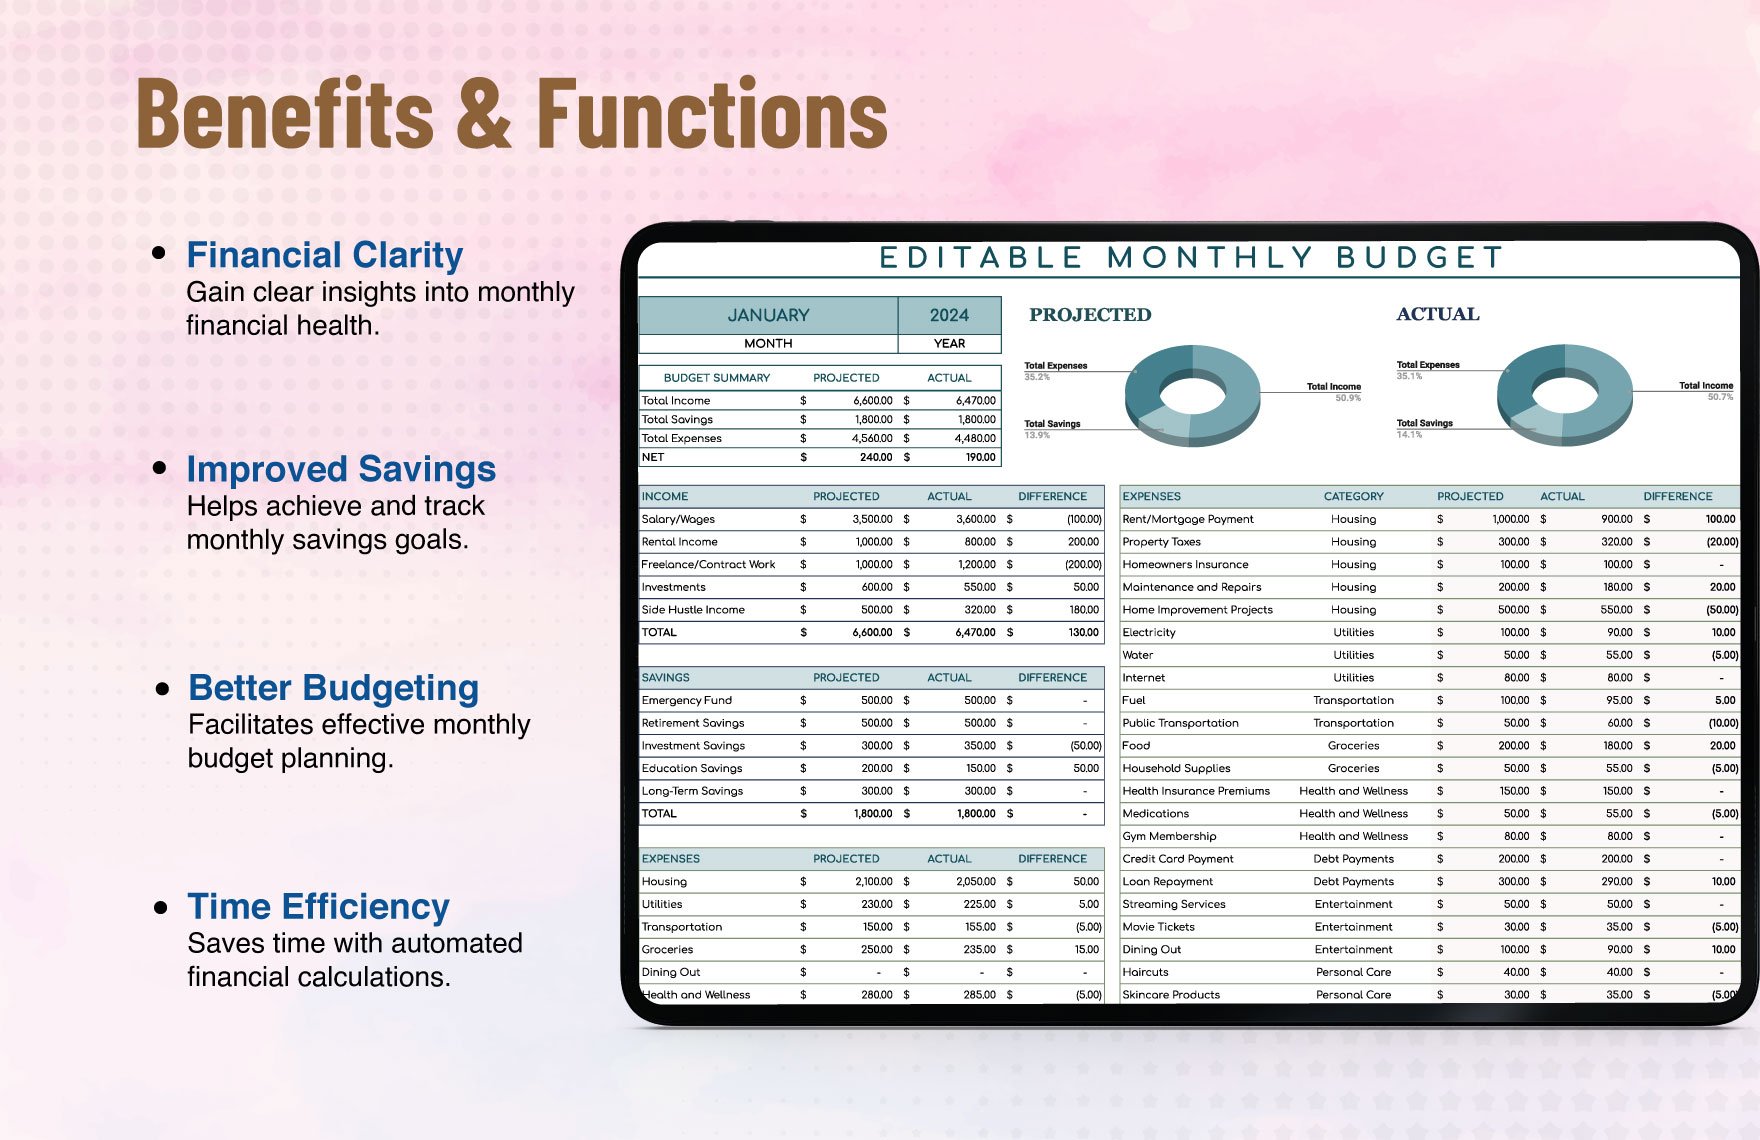 Editable Monthly Budget Template